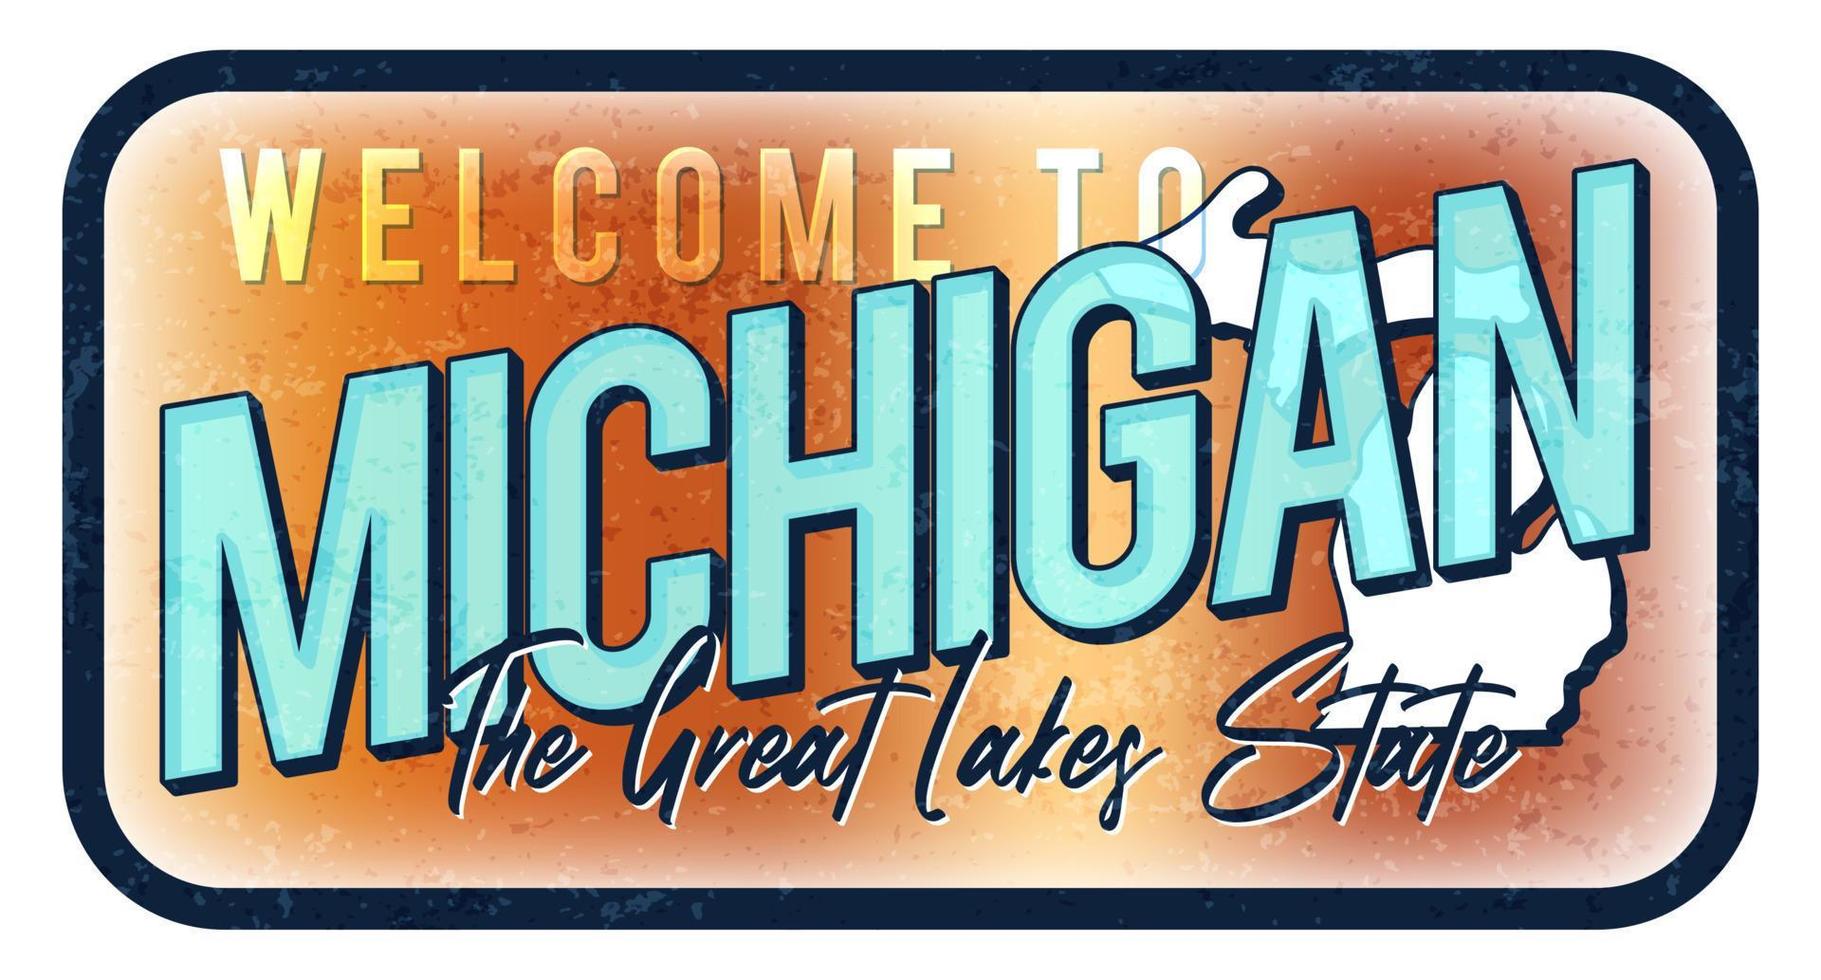 Welcome to Michigan vintage rusty metal sign vector illustration. Vector state map in grunge style with Typography hand drawn lettering